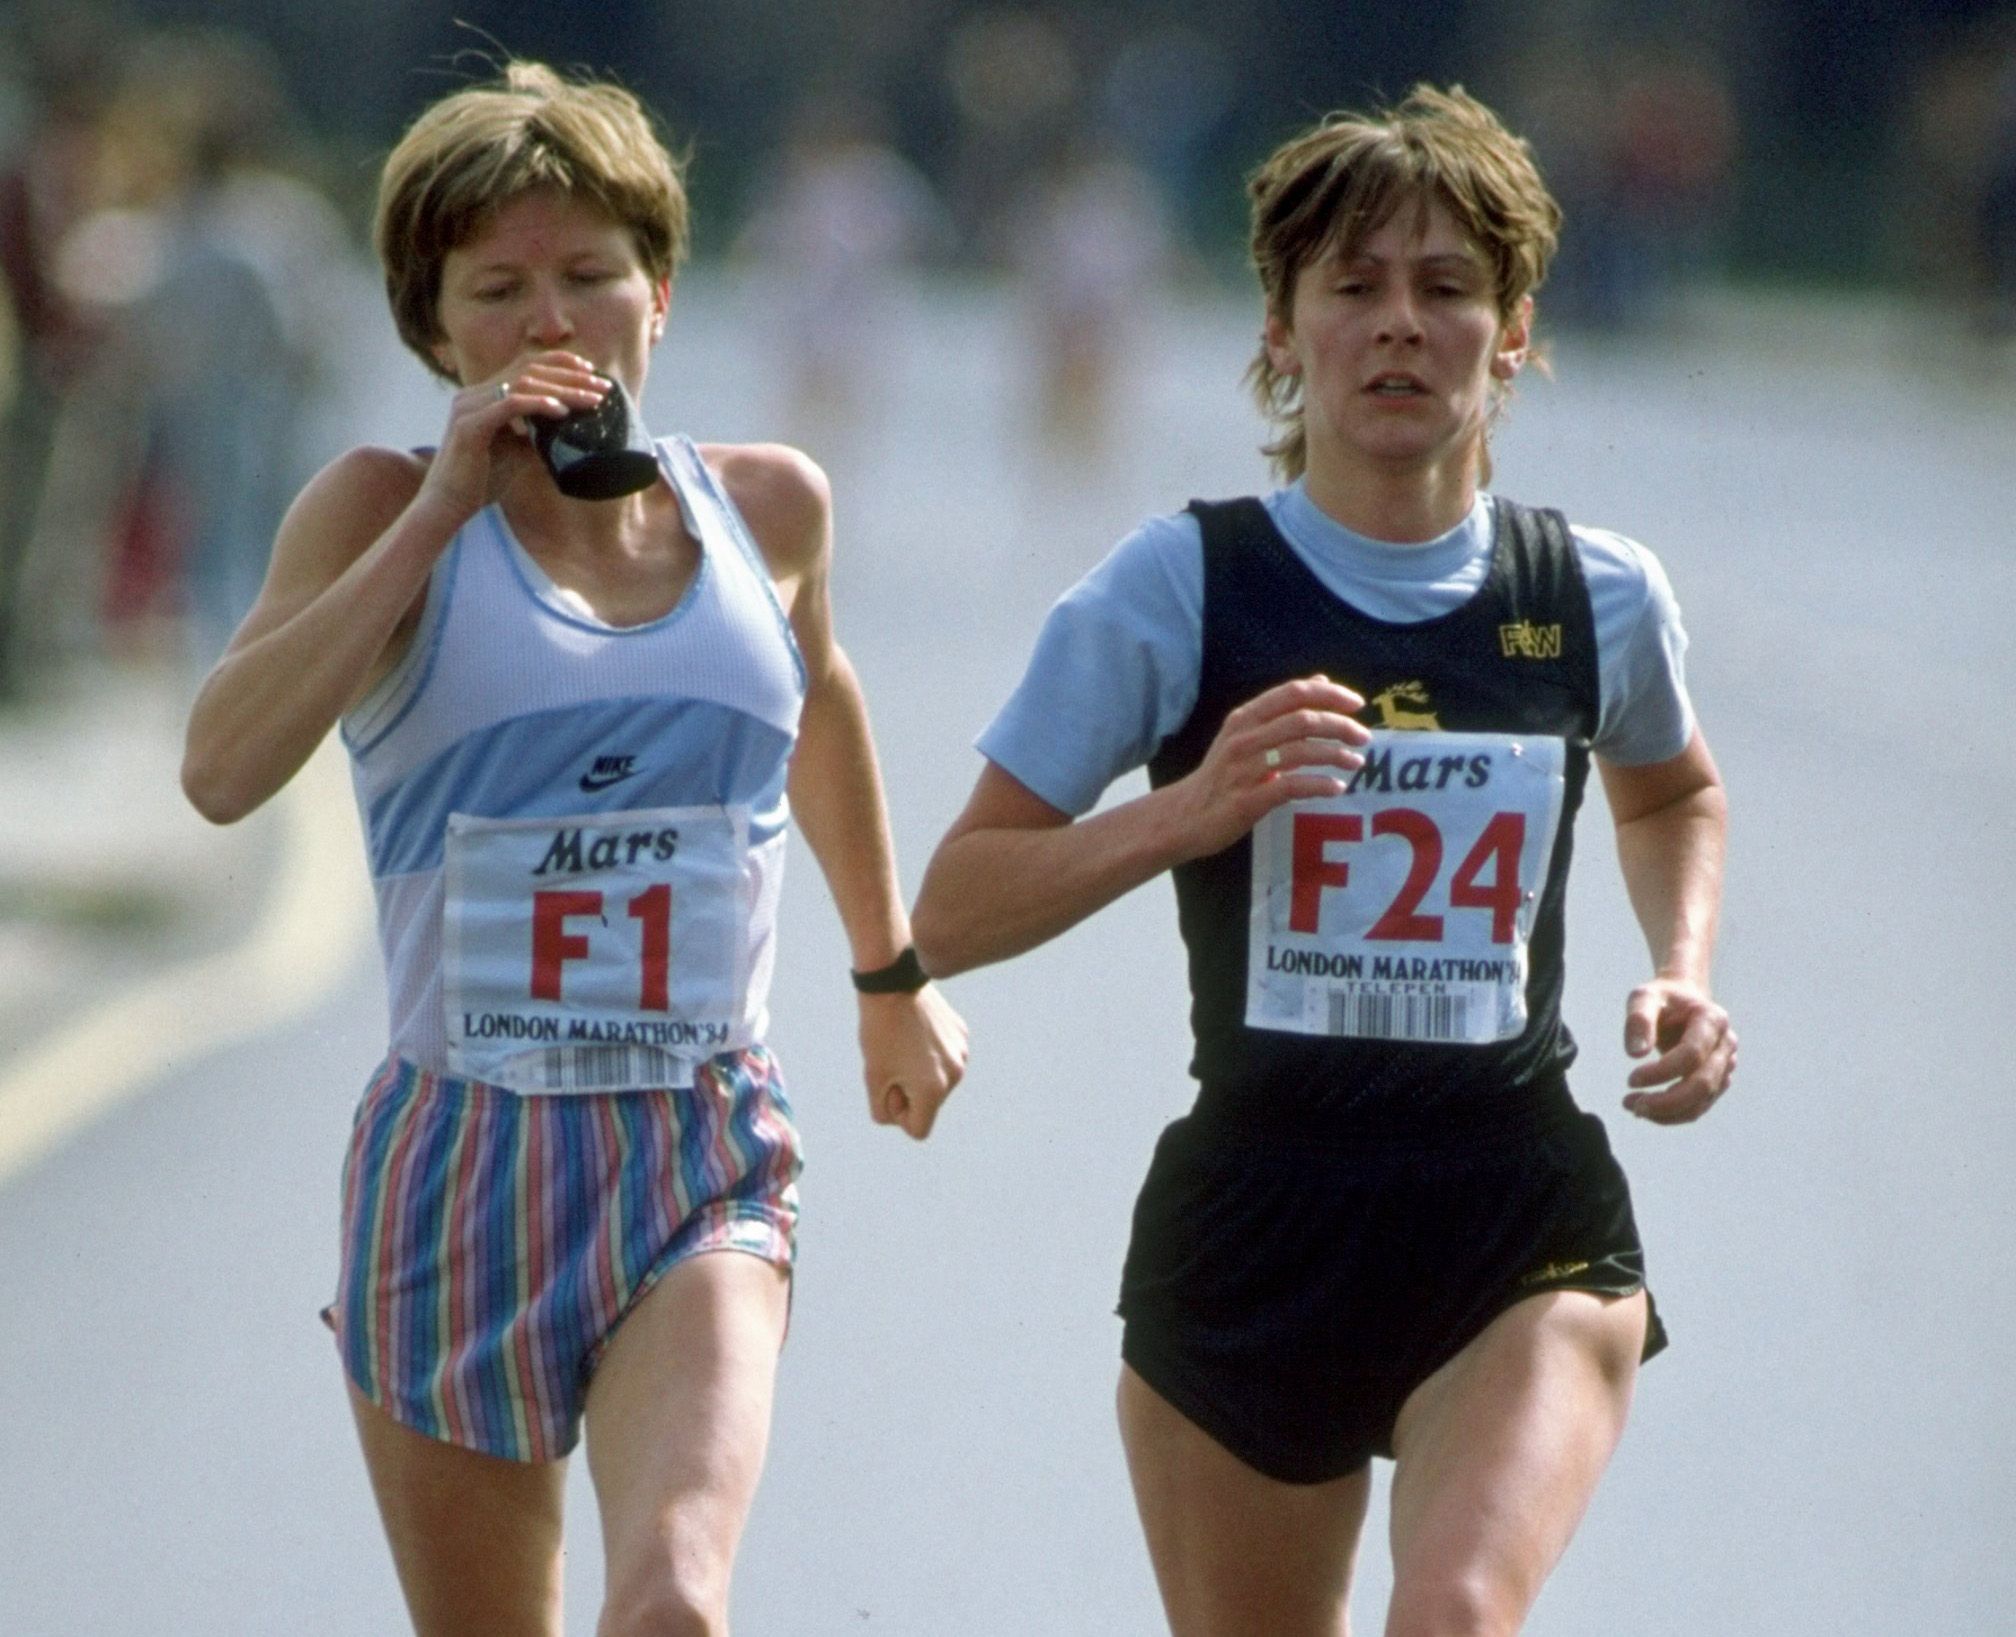 Ingrid Kristiansen and Mary Cotton in action during the 1984 London Marathon